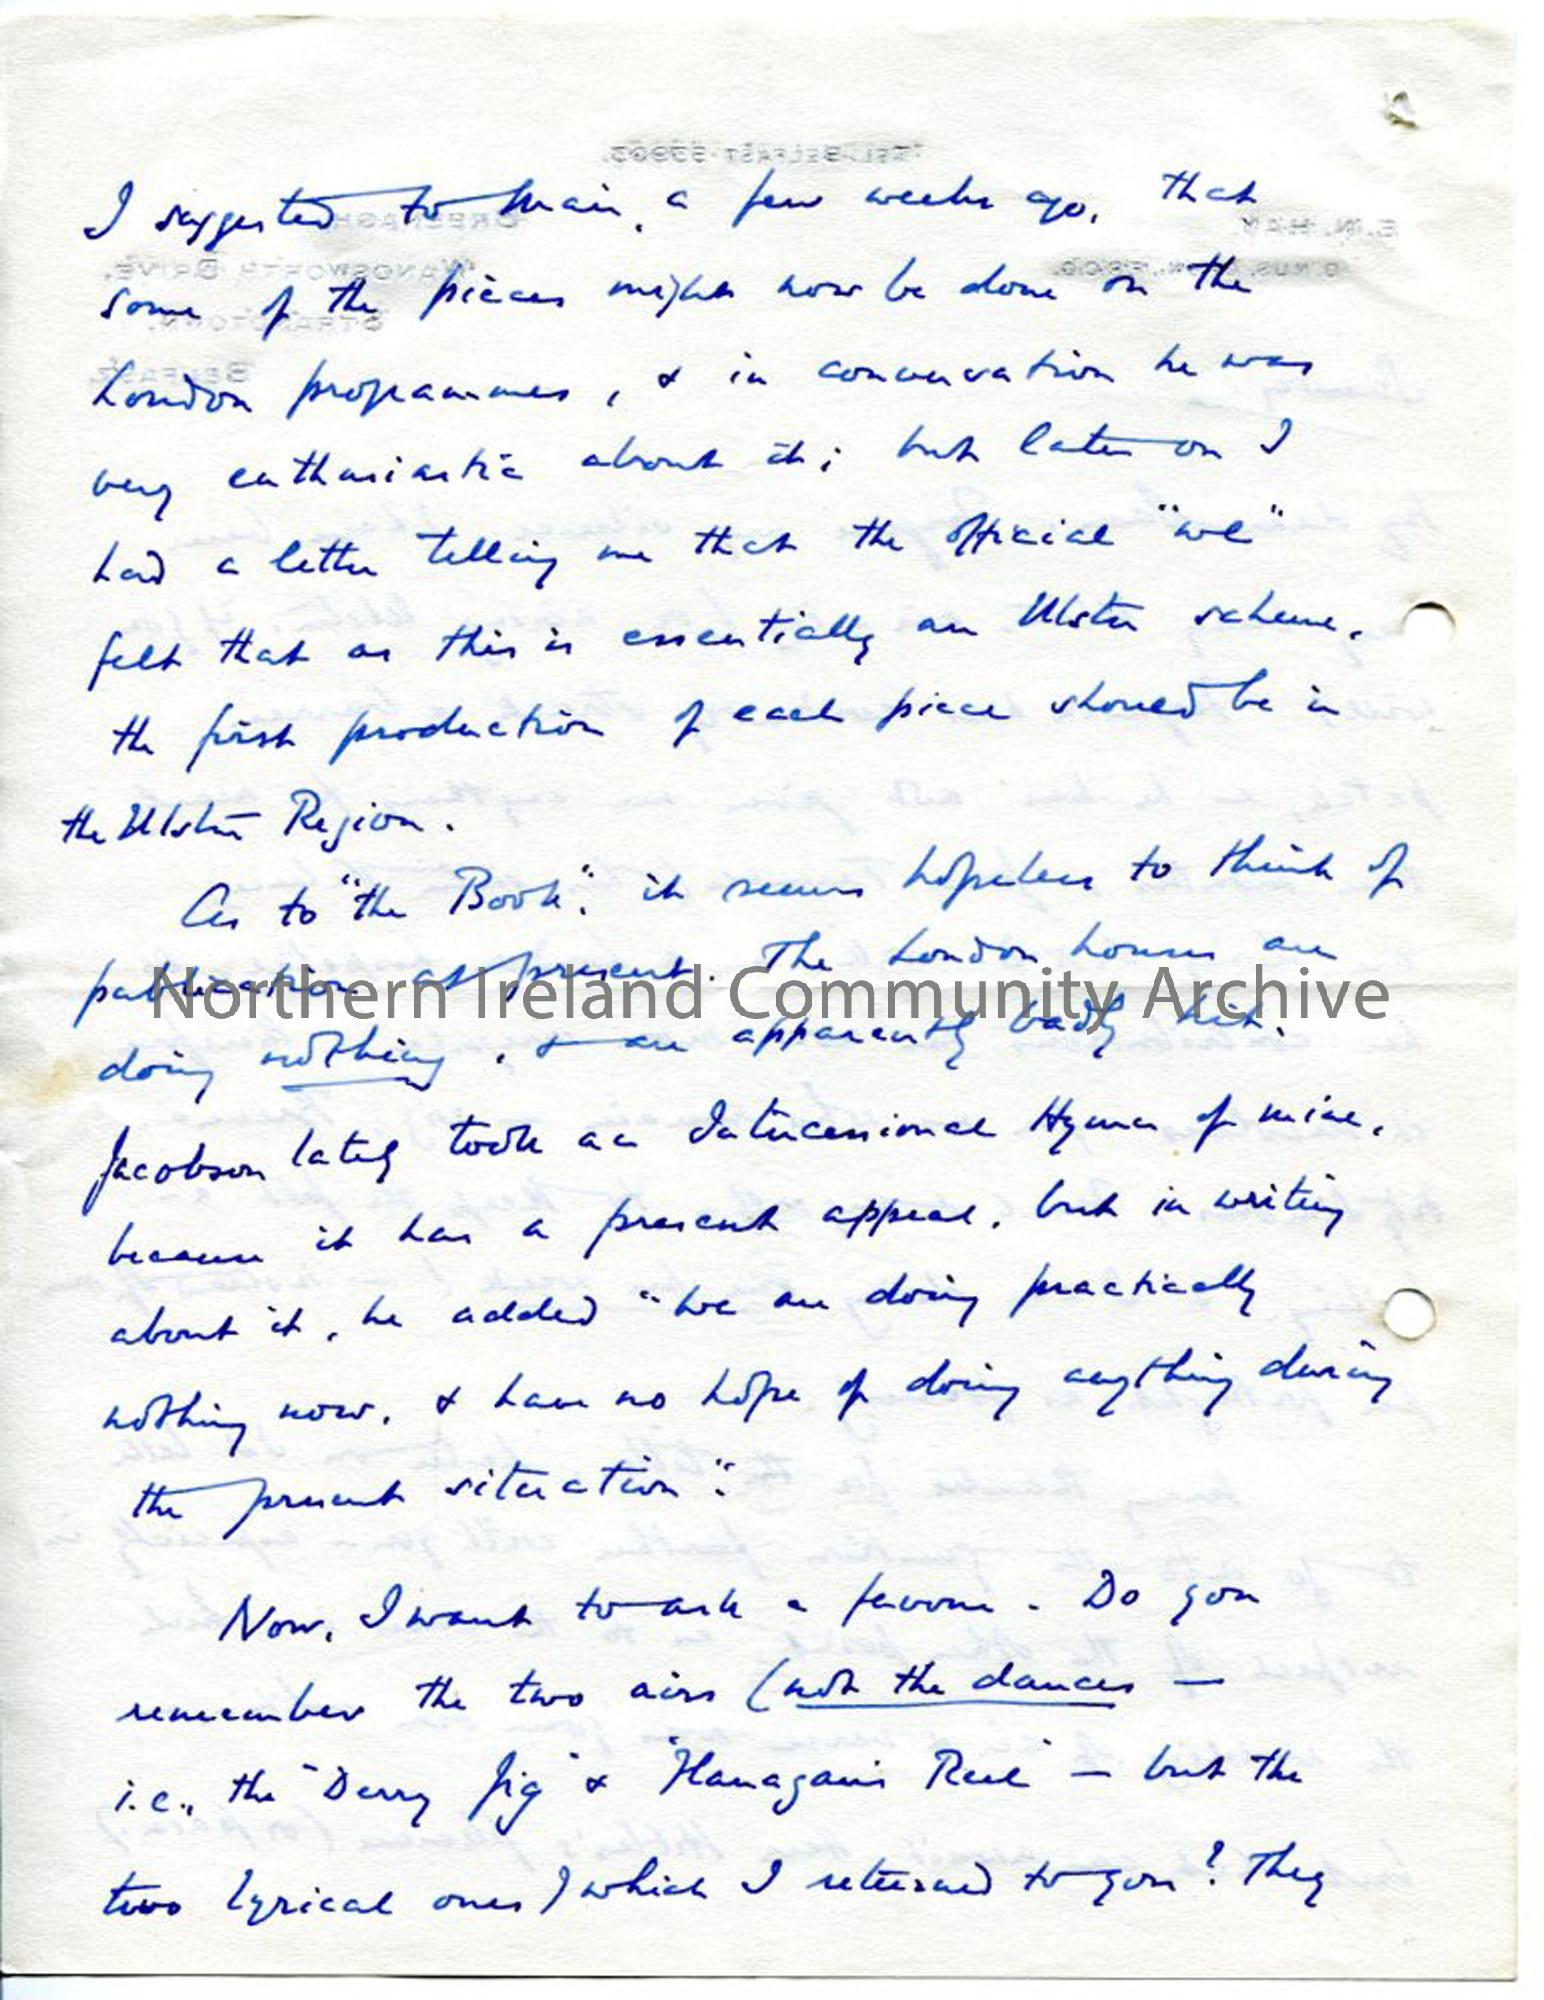 Page 2 of 3 – Letter from Norman Hay, no date recorded